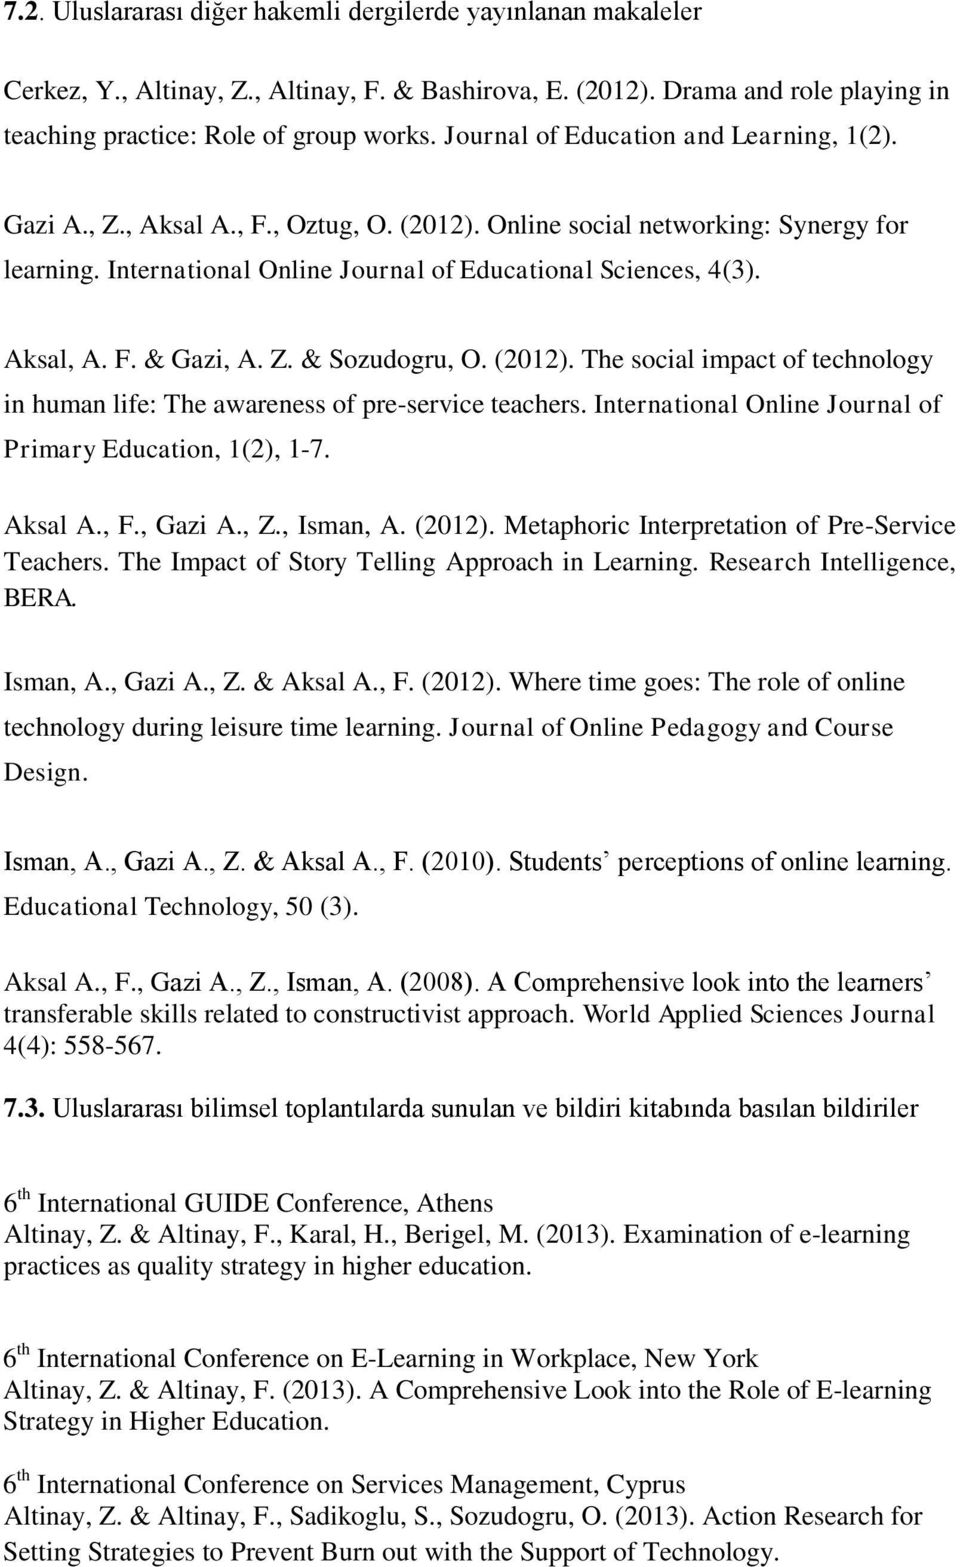 Aksal, A. F. & Gazi, A. Z. & Sozudogru, O. (2012). The social impact of technology in human life: The awareness of pre-service teachers. International Online Journal of Primary Education, 1(2), 1-7.